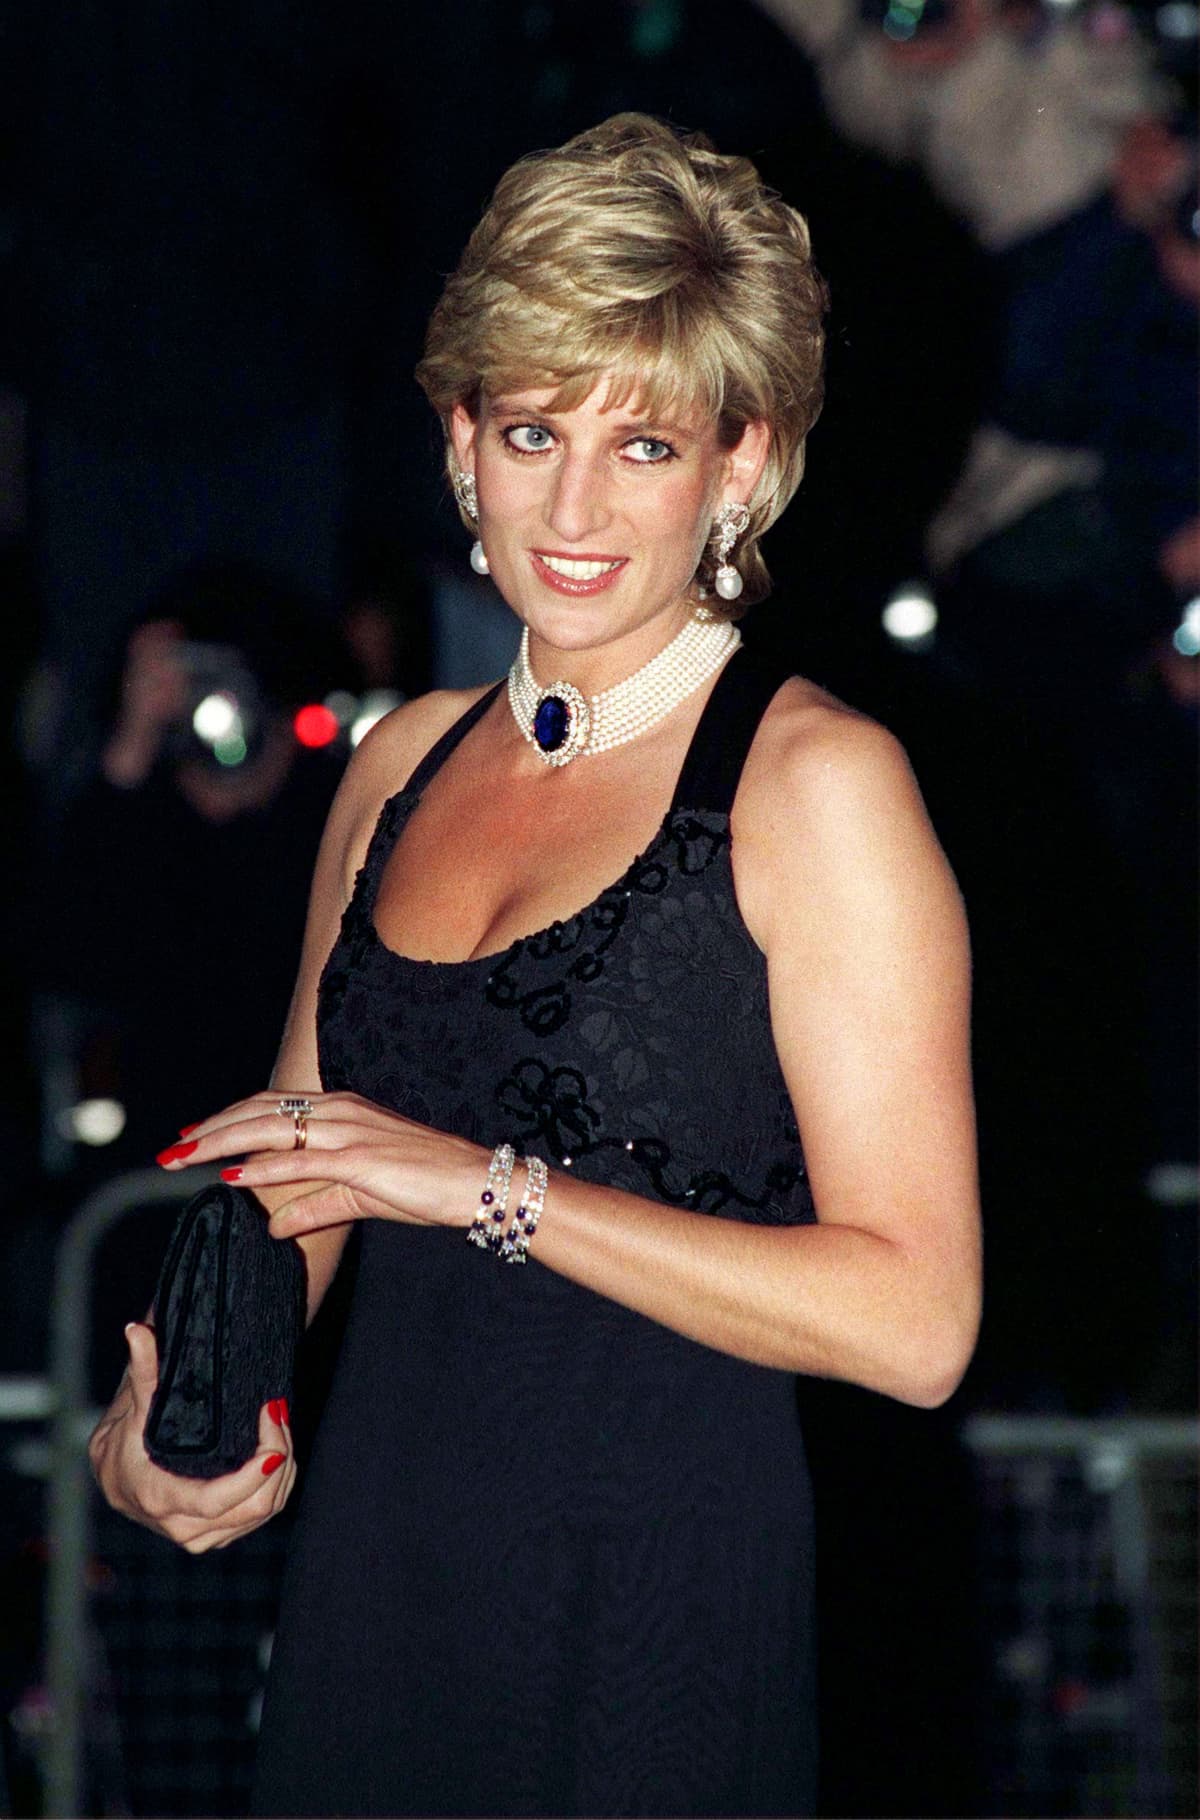 Diana, Princess Of Wales, smiling in a black sleeveless dress.